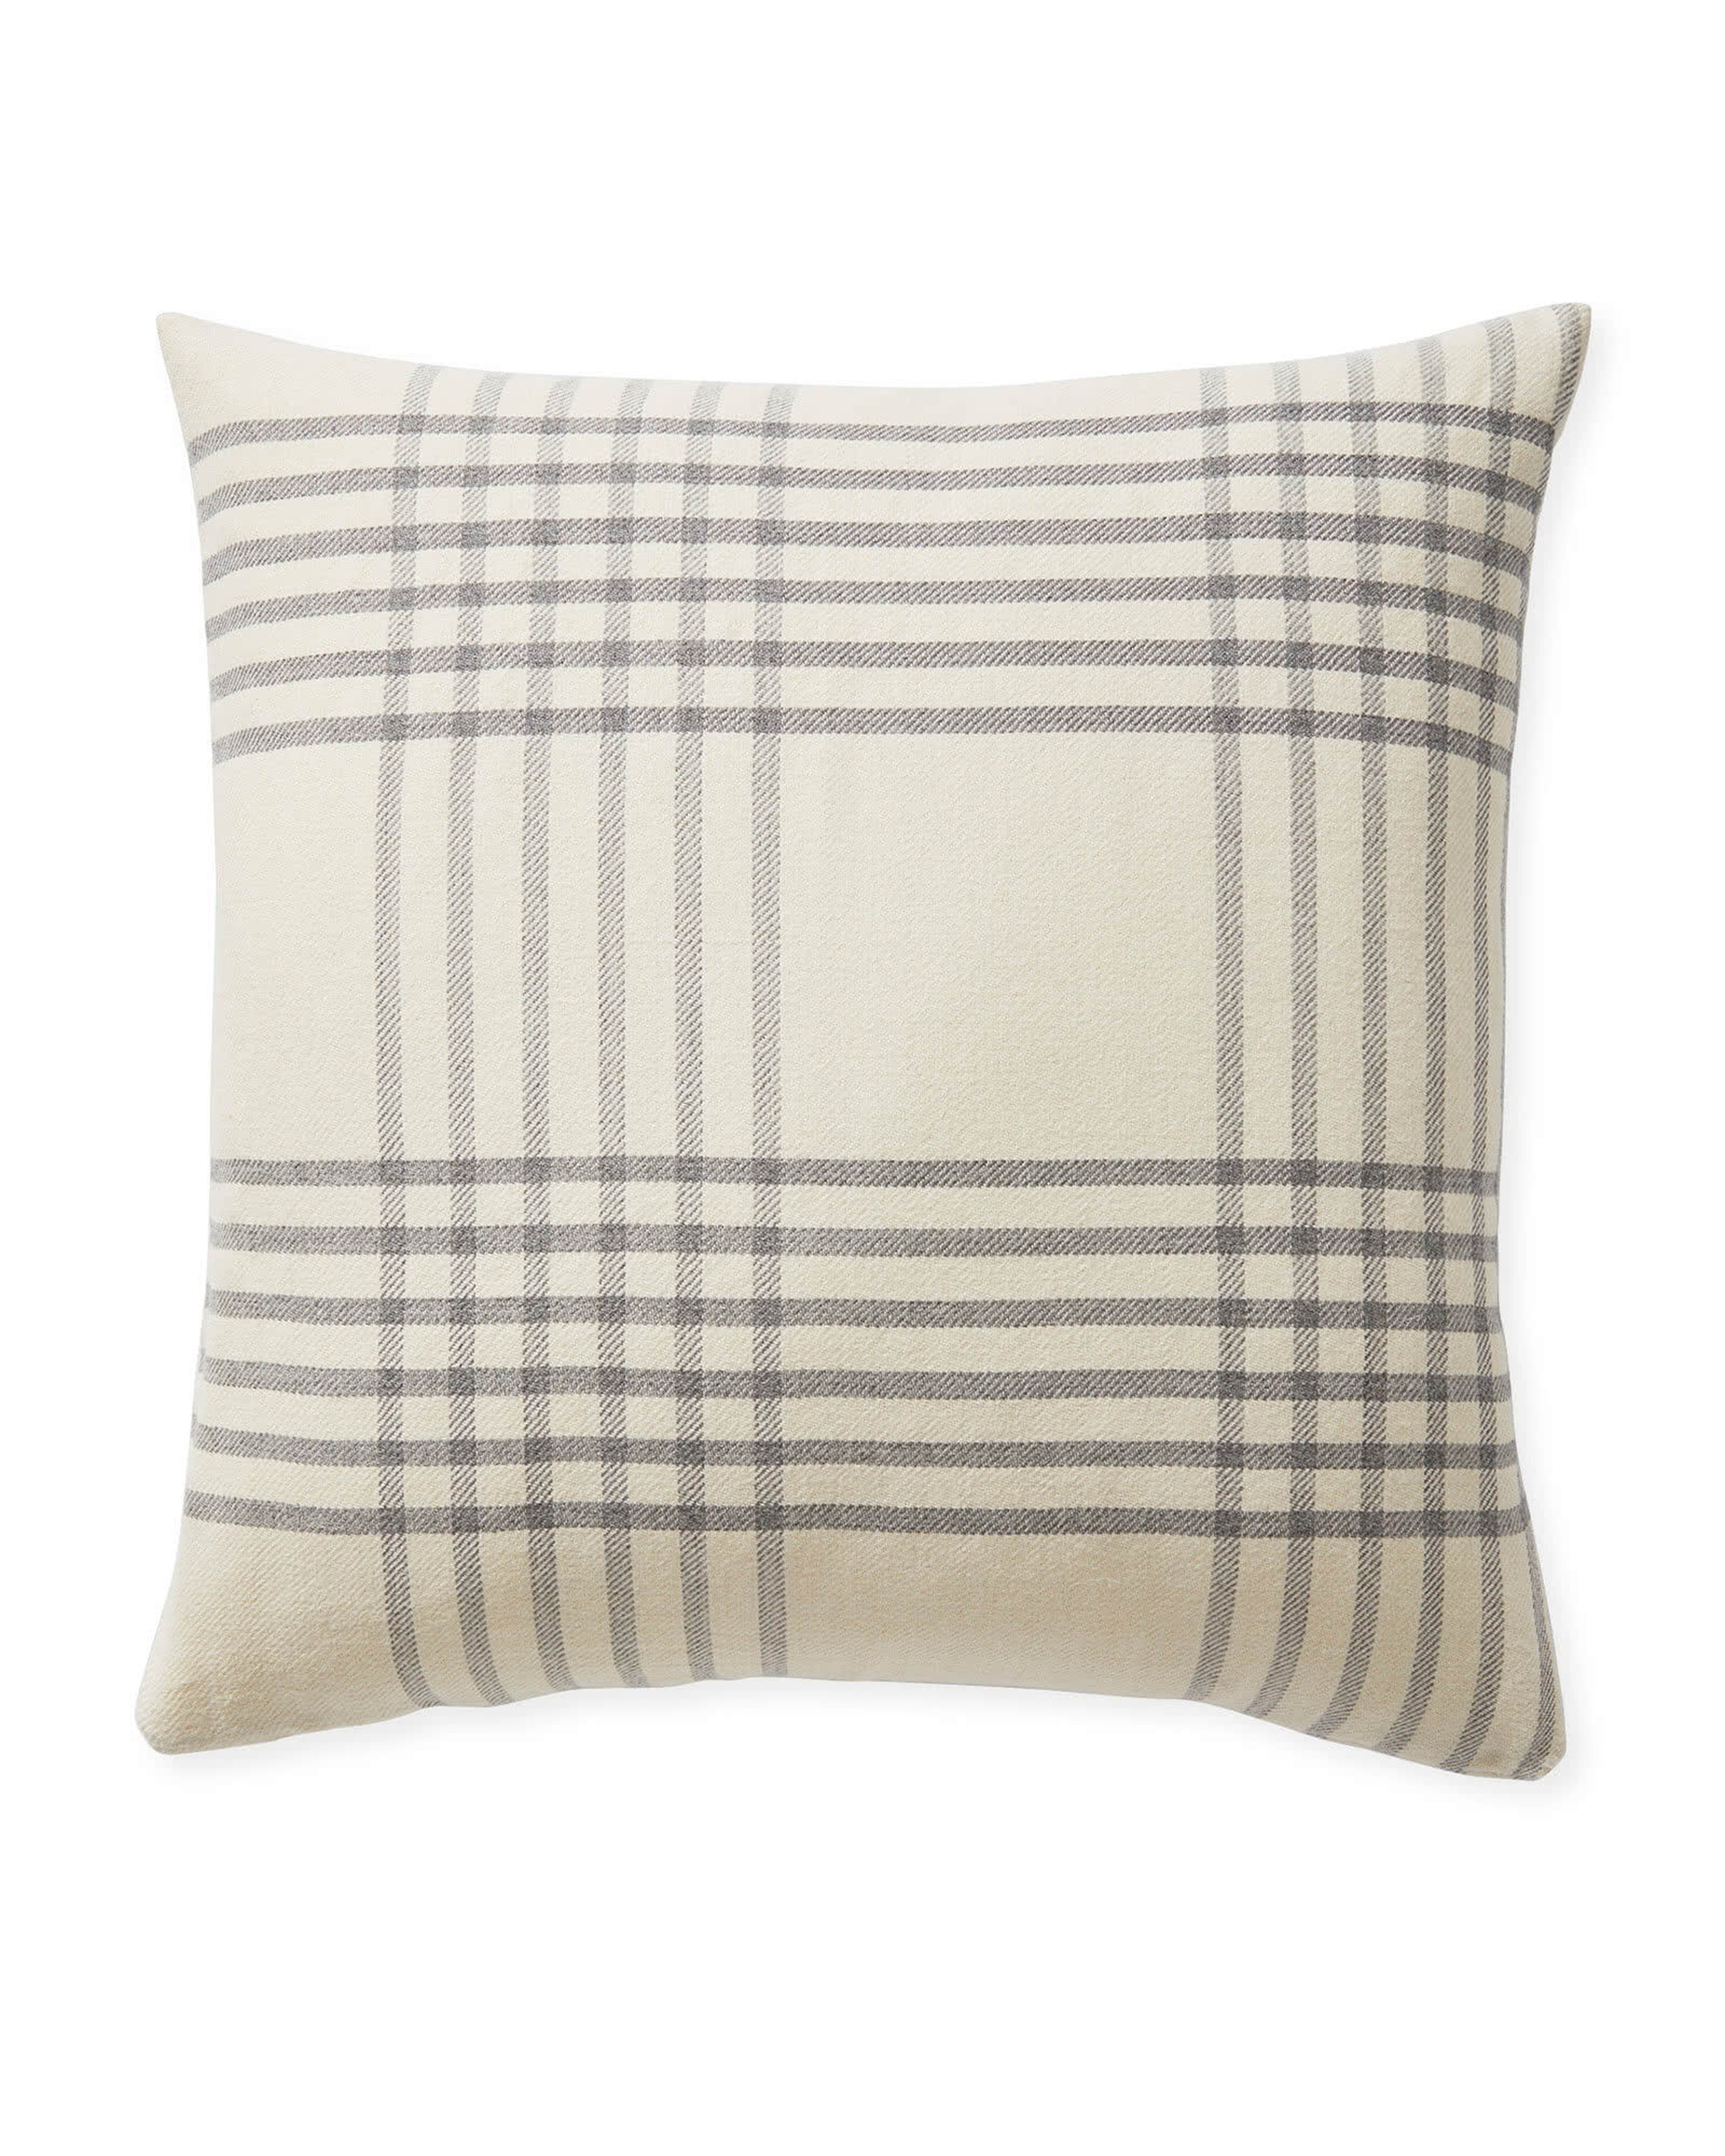 Blakely Plaid Pillow Cover, Ivory & Gray, 24" x 24" - Serena and Lily